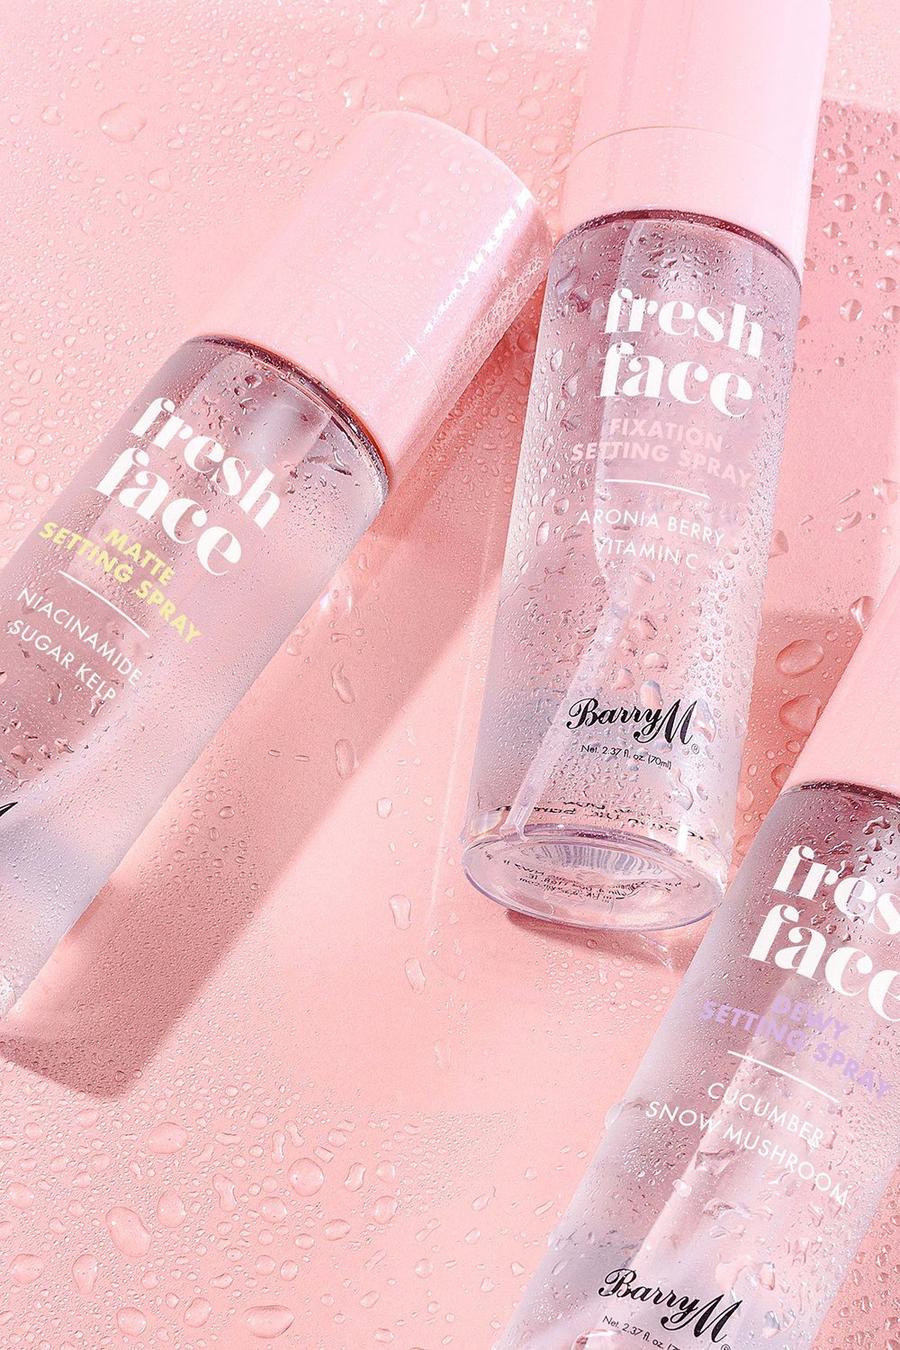 Barry M - Spray fissante Fresh Face effetto Matte, Clear